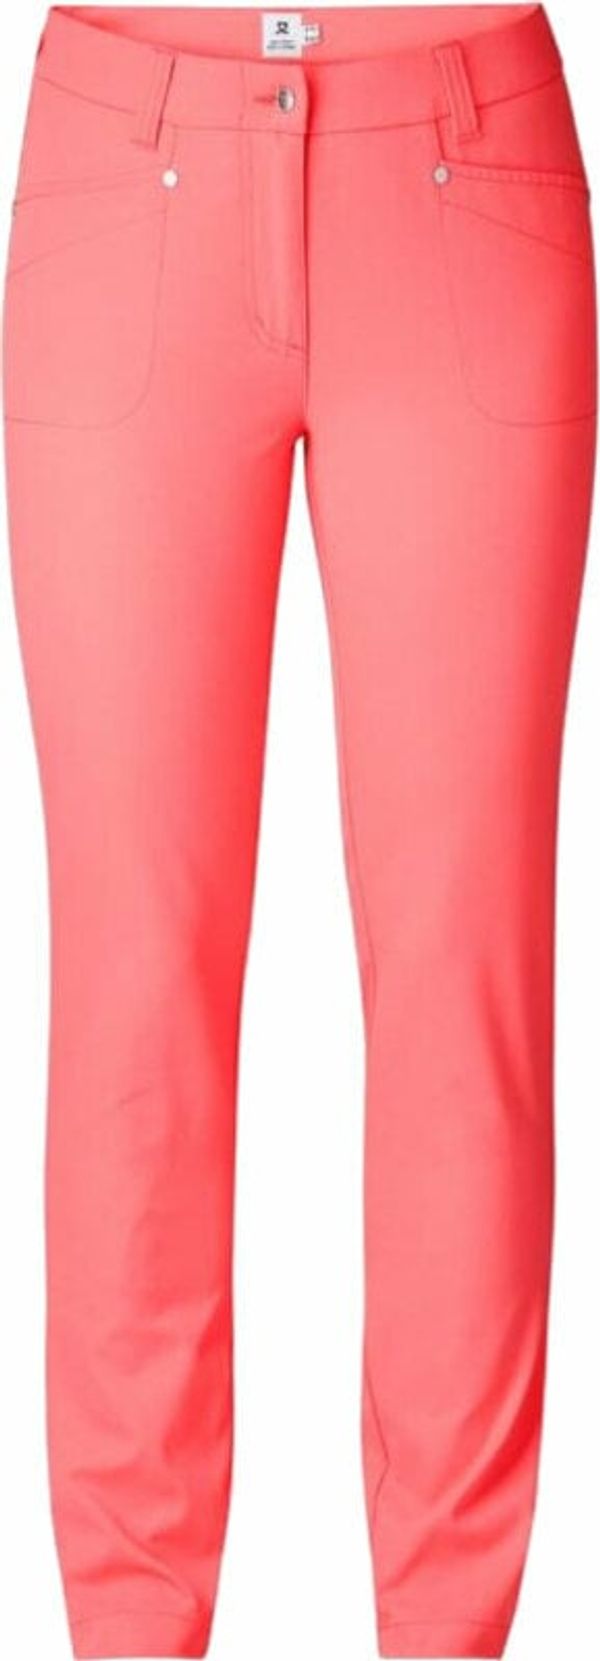 Daily Sports Daily Sports Lyric Pants 29" Coral 38